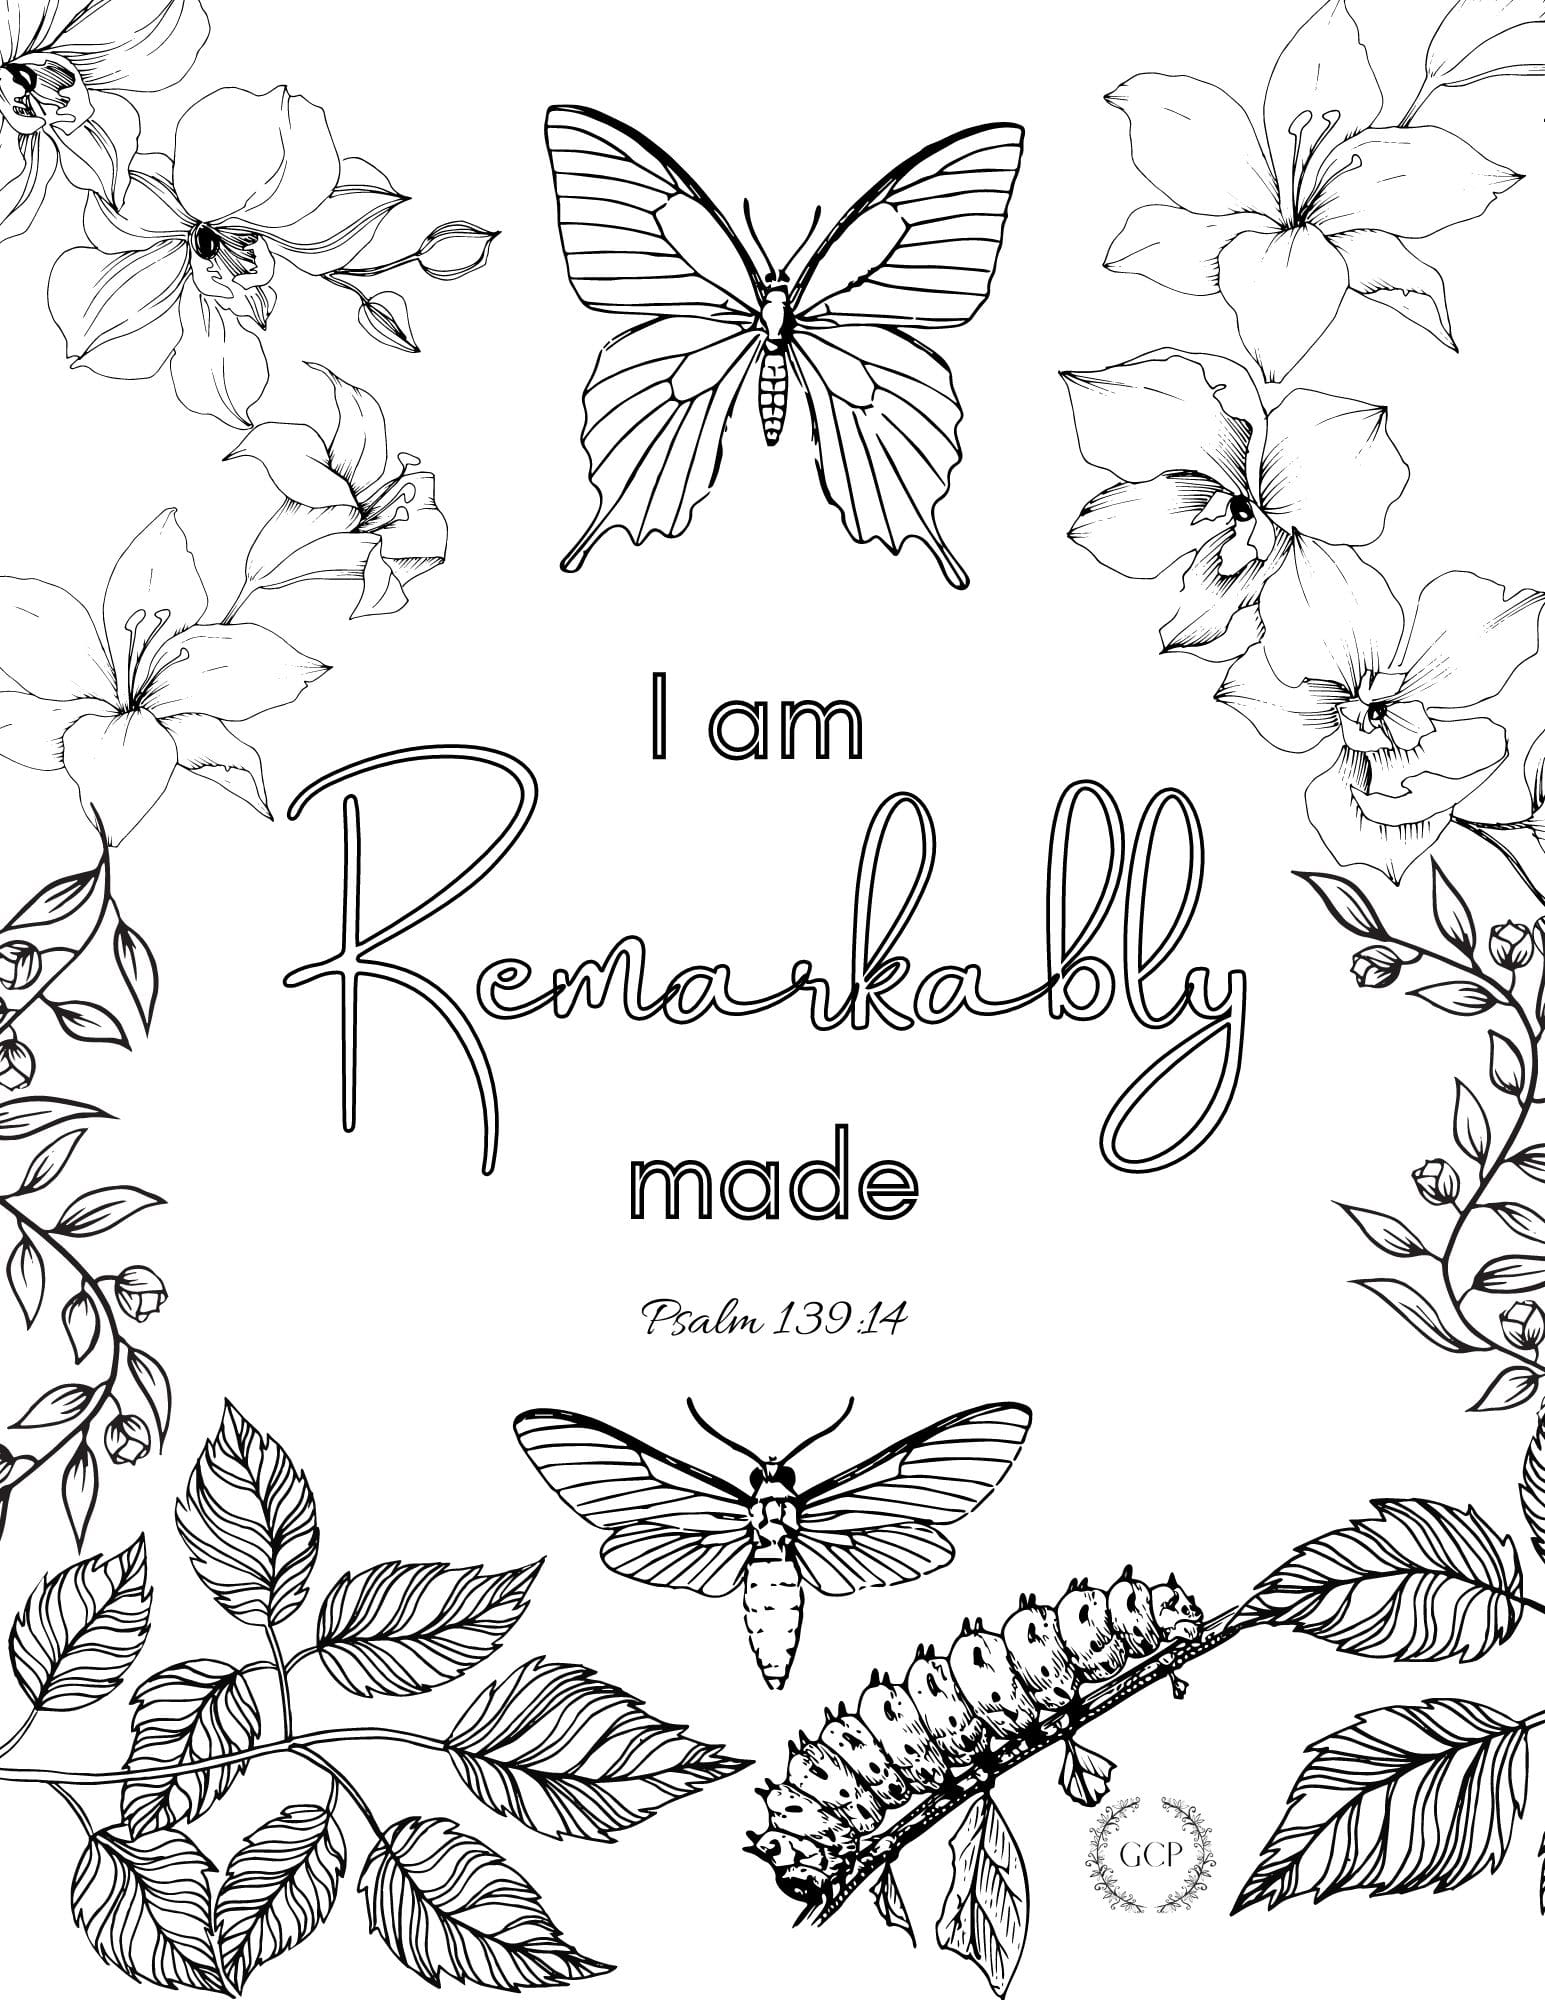 15 Printable Scripture Coloring Pages For Adults Happier Human